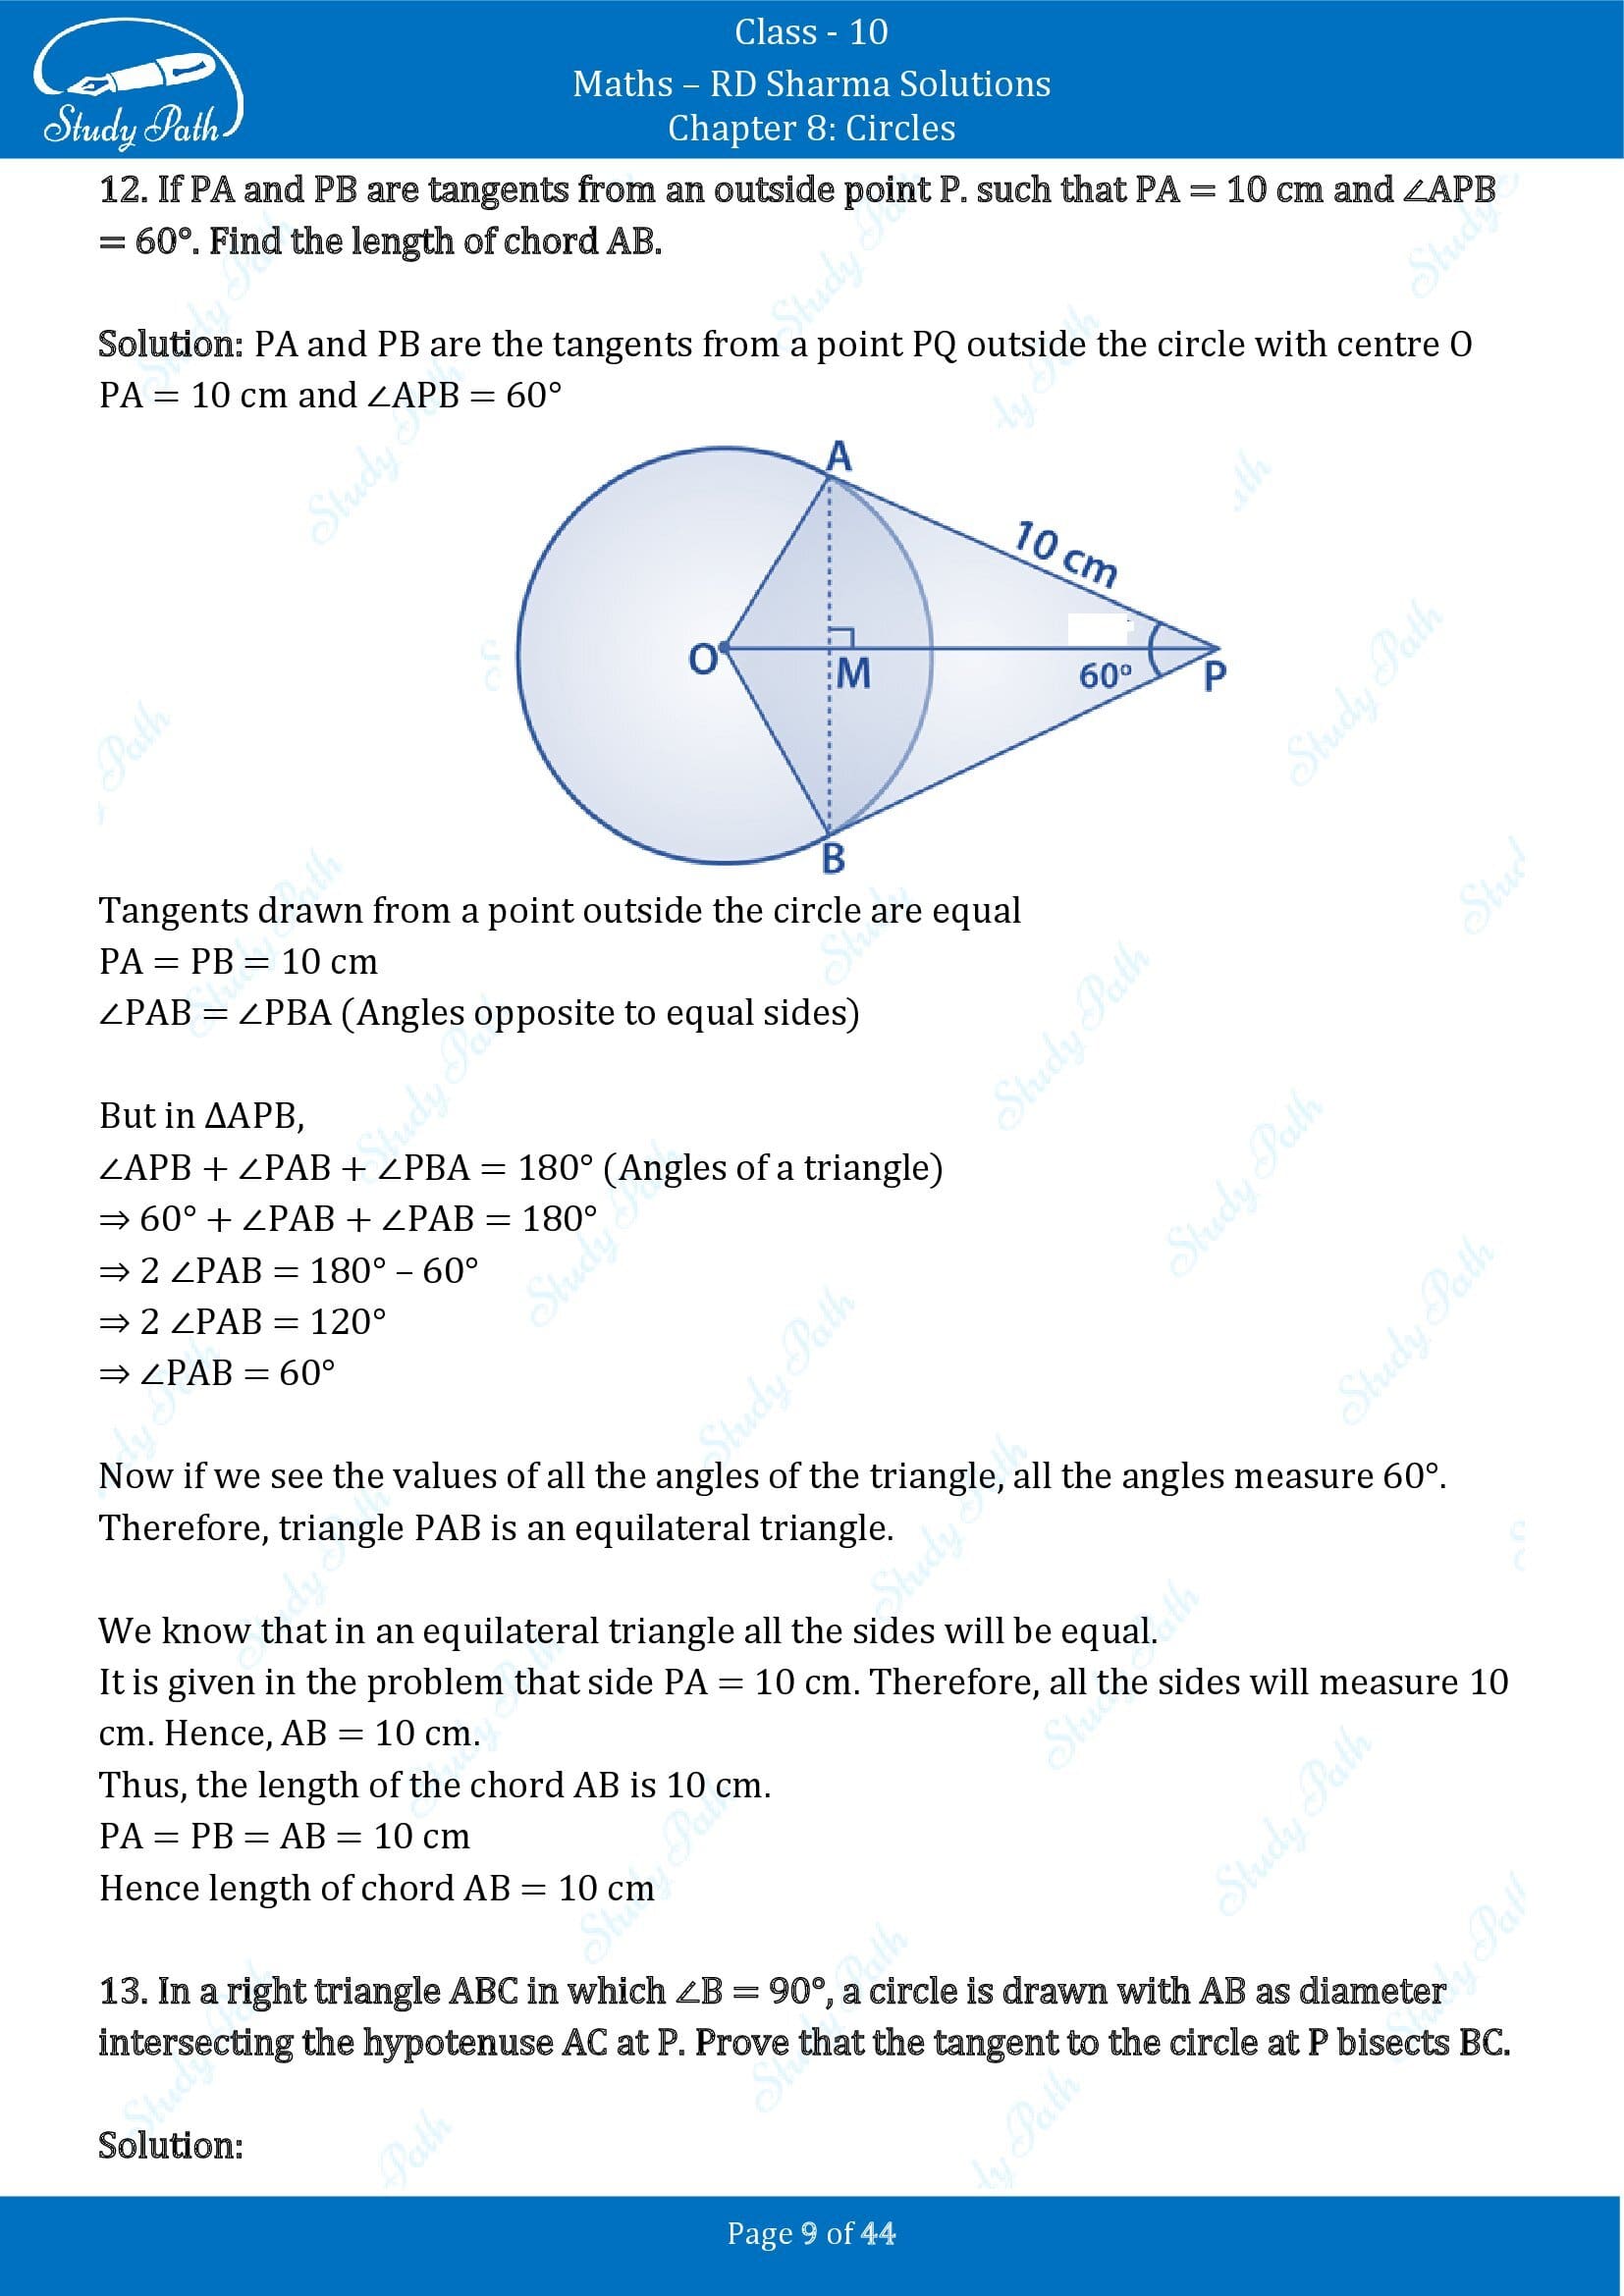 RD Sharma Solutions Class 10 Chapter 8 Circles Exercise 8.2 00009